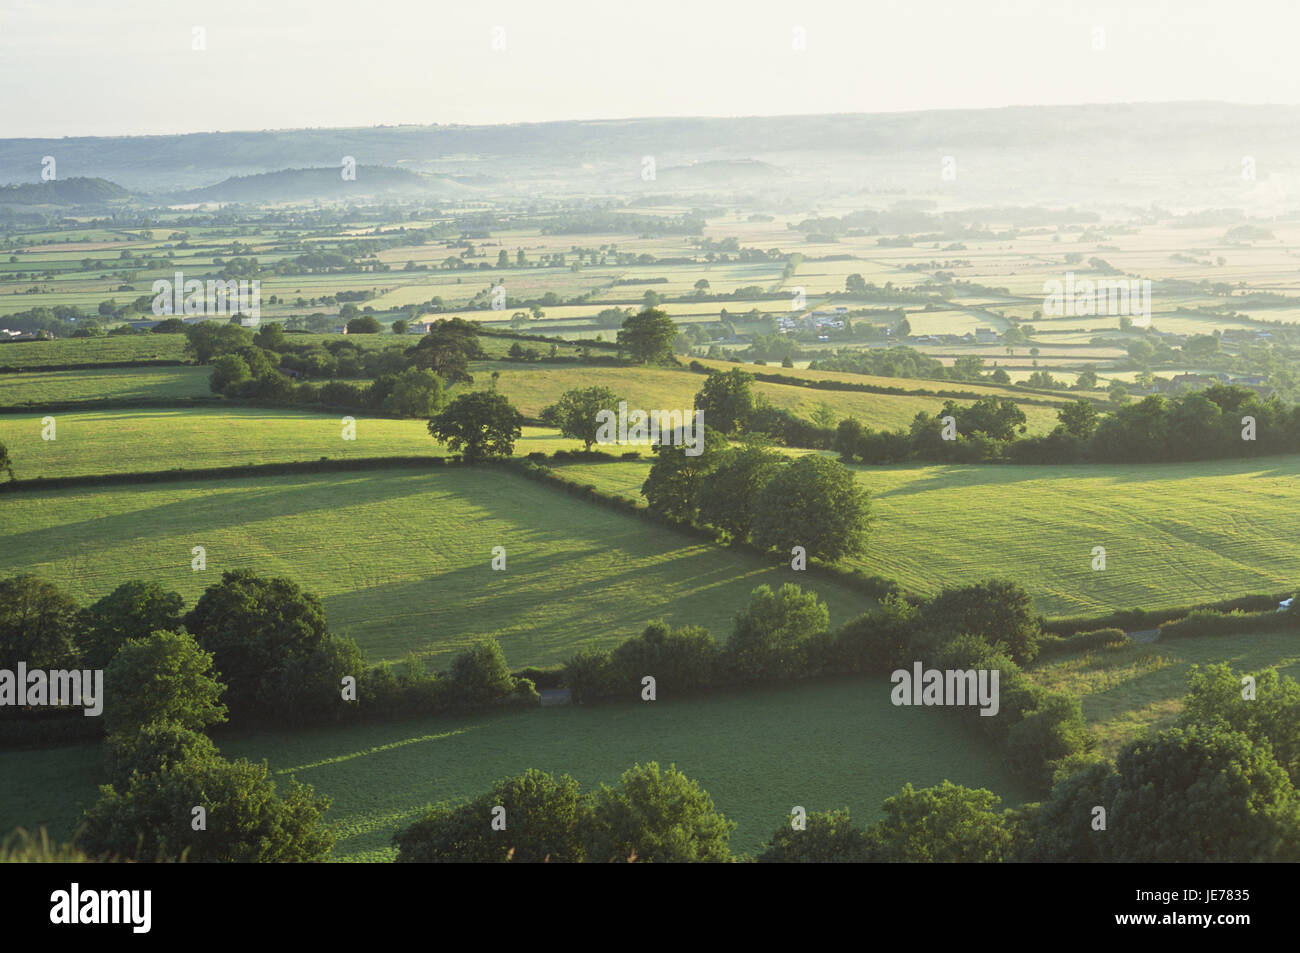 Great Britain, England, Somerset, scenery, fields, view, hazy, Europe, width, distance, field scenery, trees, demarcation, agriculture, foggy, sunny, Stock Photo